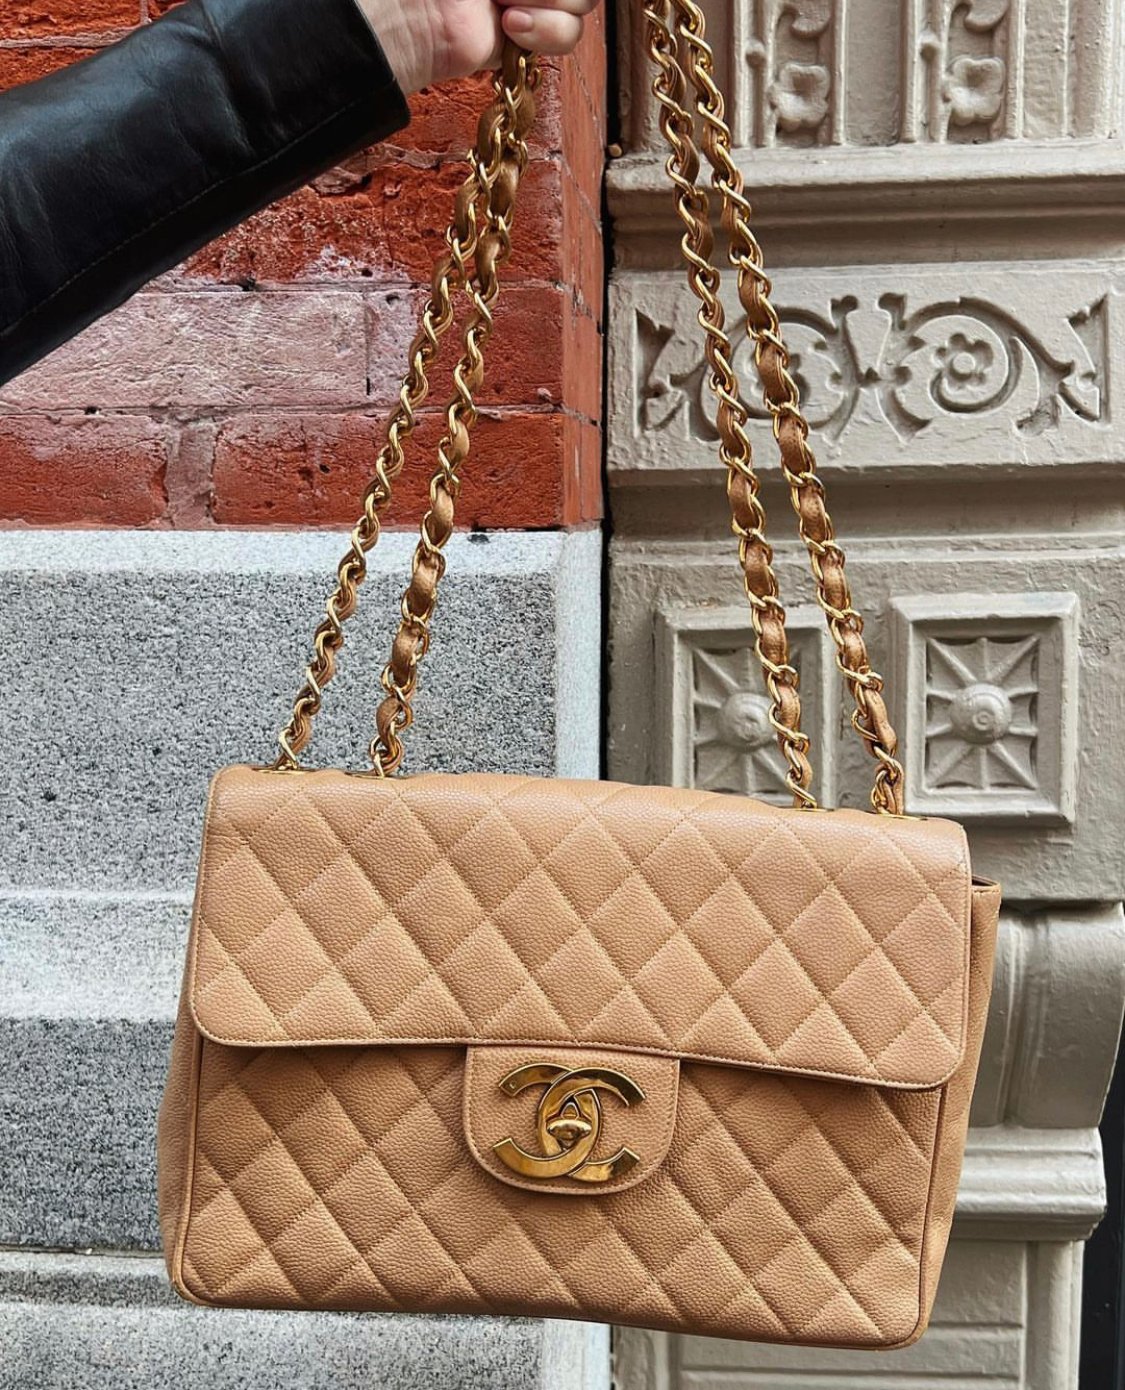 Chanel 101: The 19 Bag - The Vault